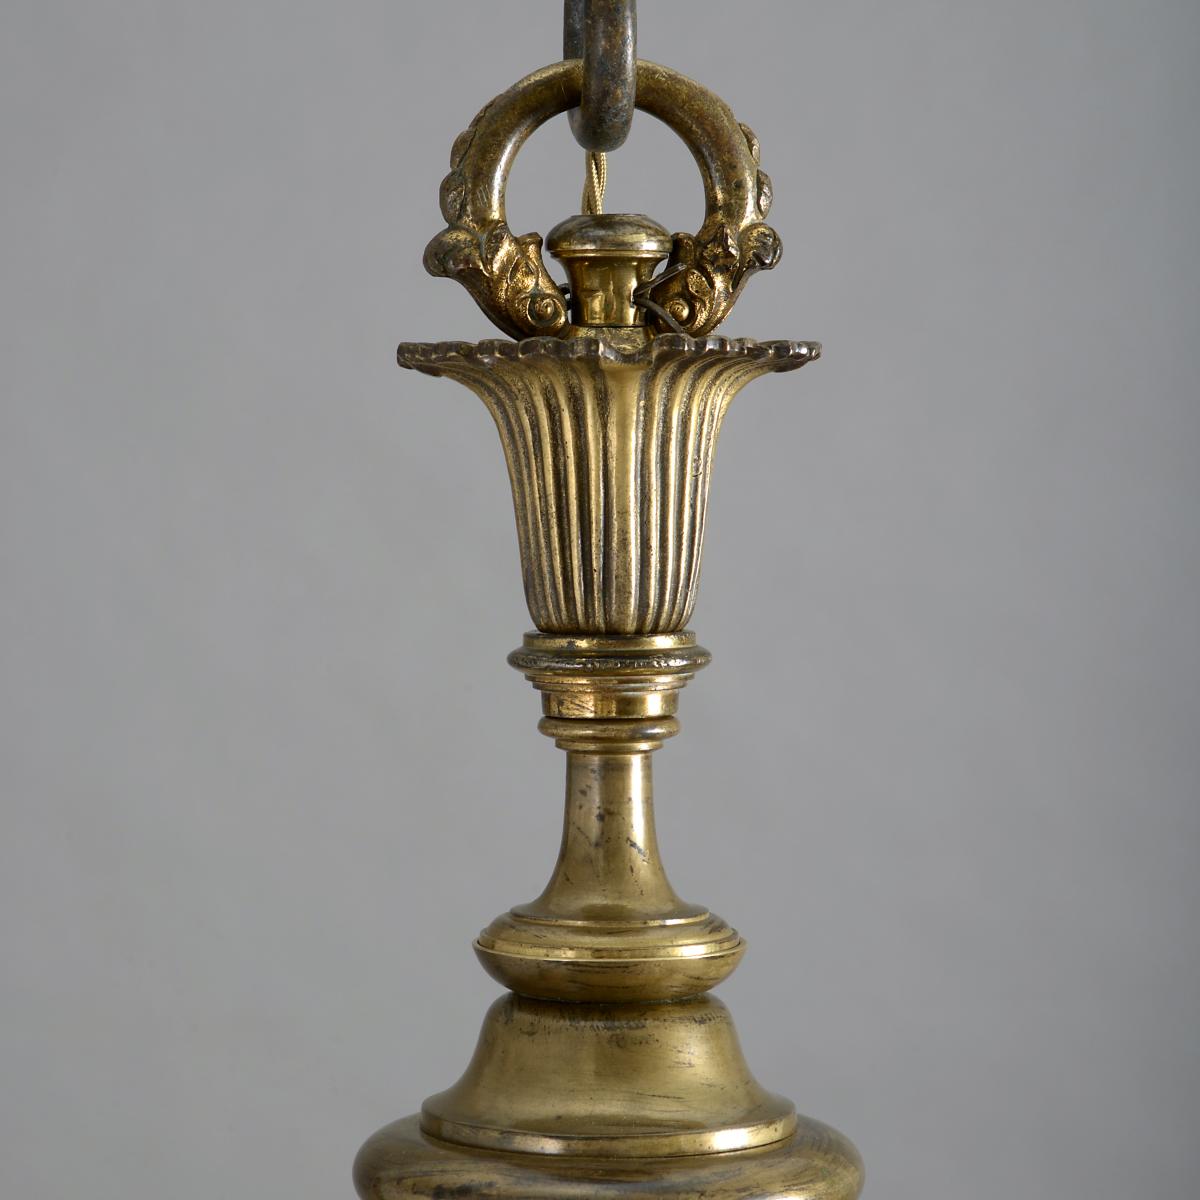 George IV Lacquered Brass Chandelier